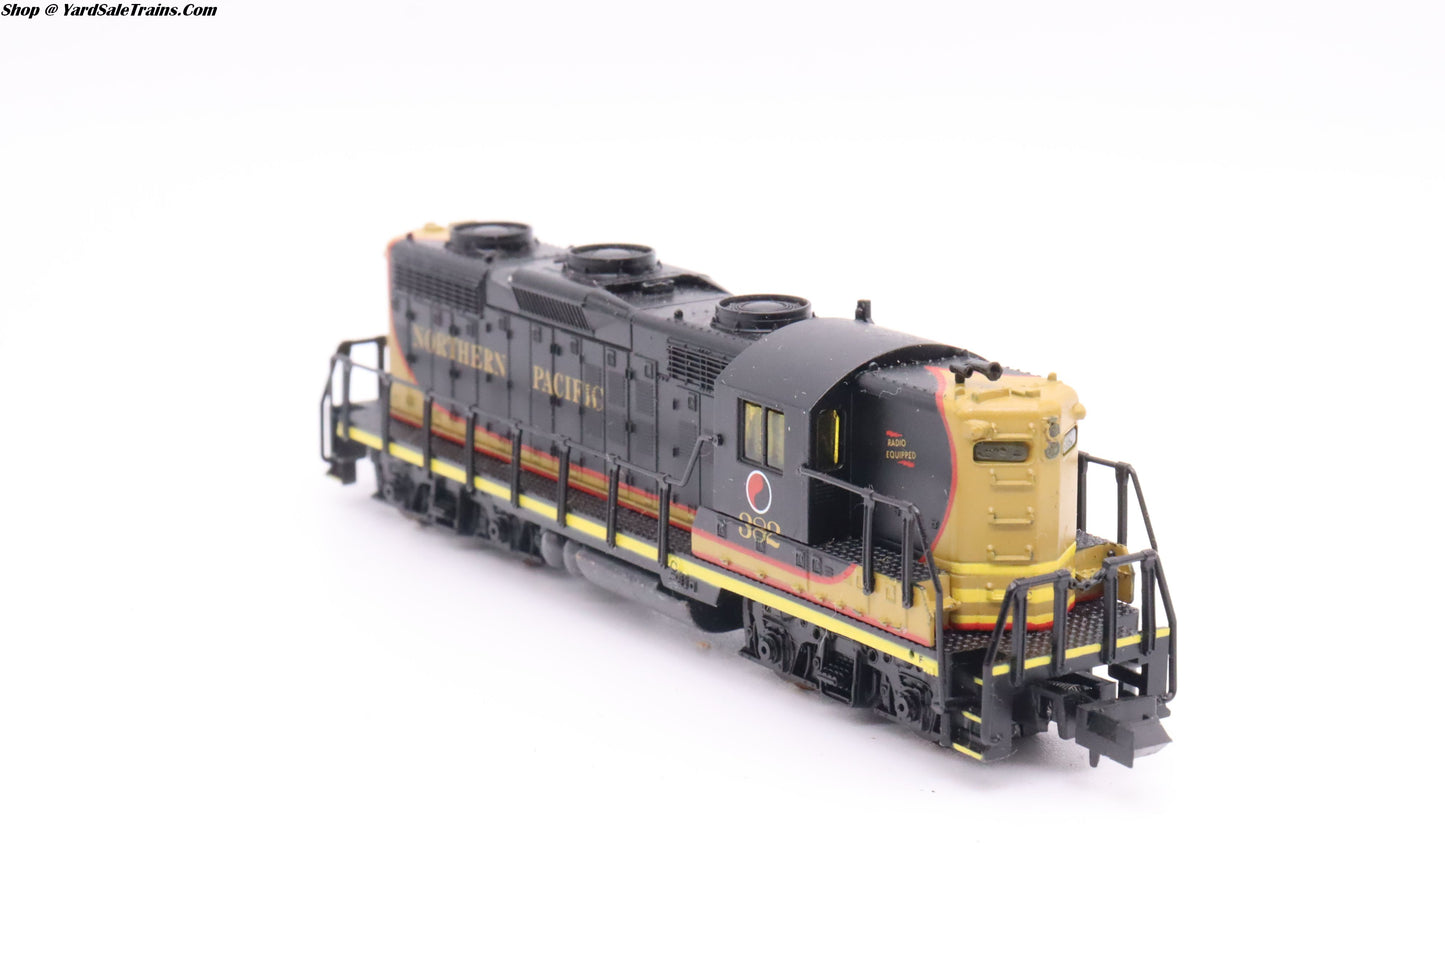 LL-7124 - GP18 Locomotive - Northern Pacific - NP #382 - N Scale - Preowned